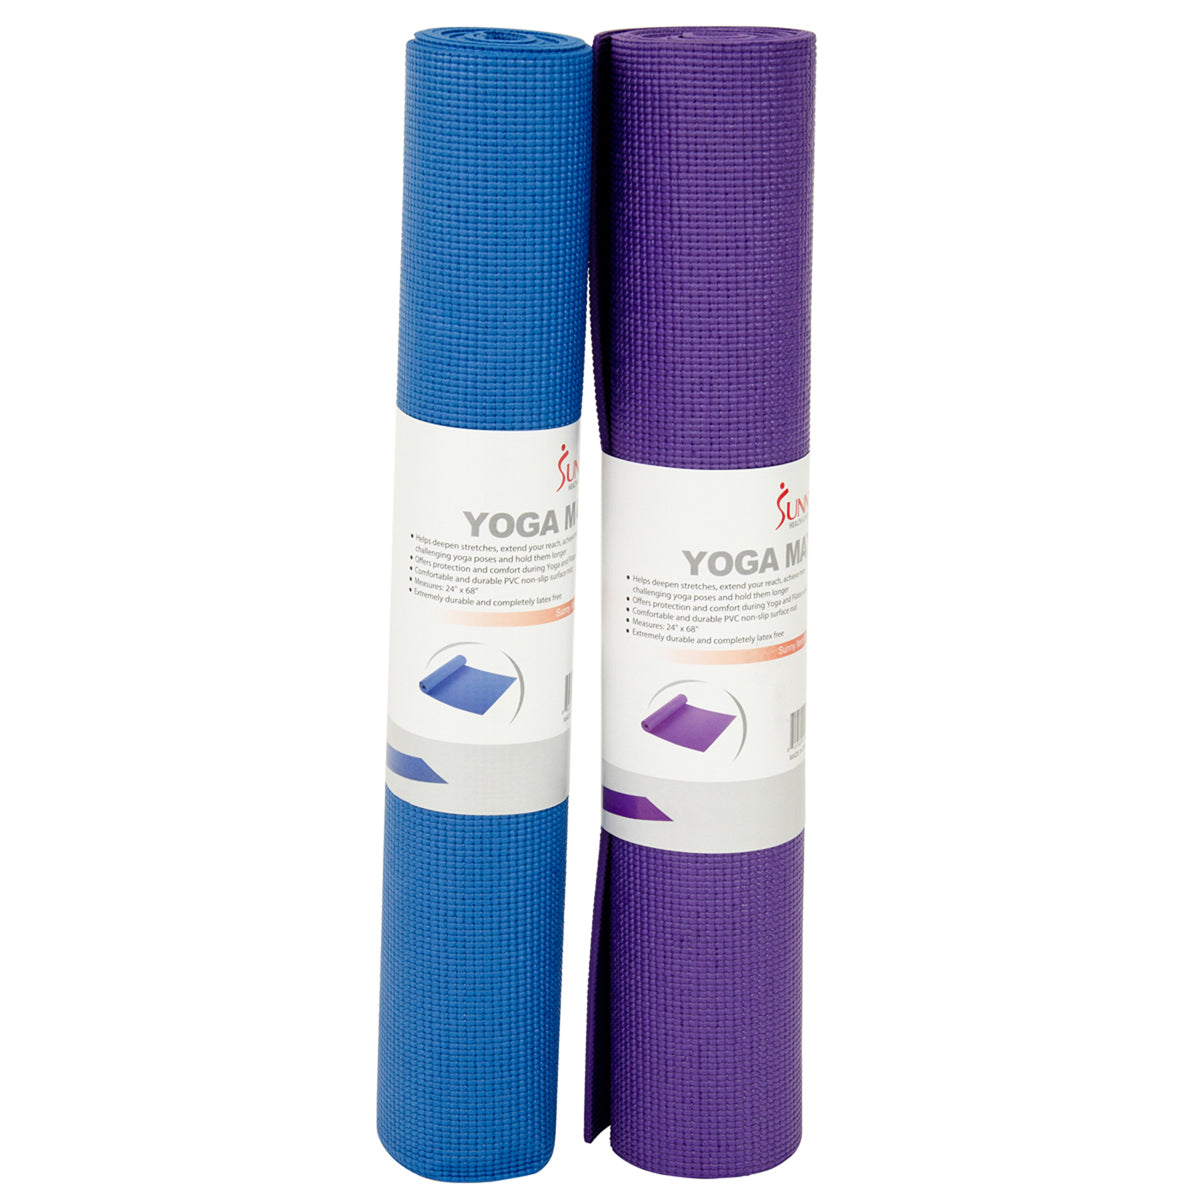 Athletic Works PVC Yoga Mat, 3mm, Real Teal, 68inx24in, Non Slip,  Cushioning for Support and Stability 